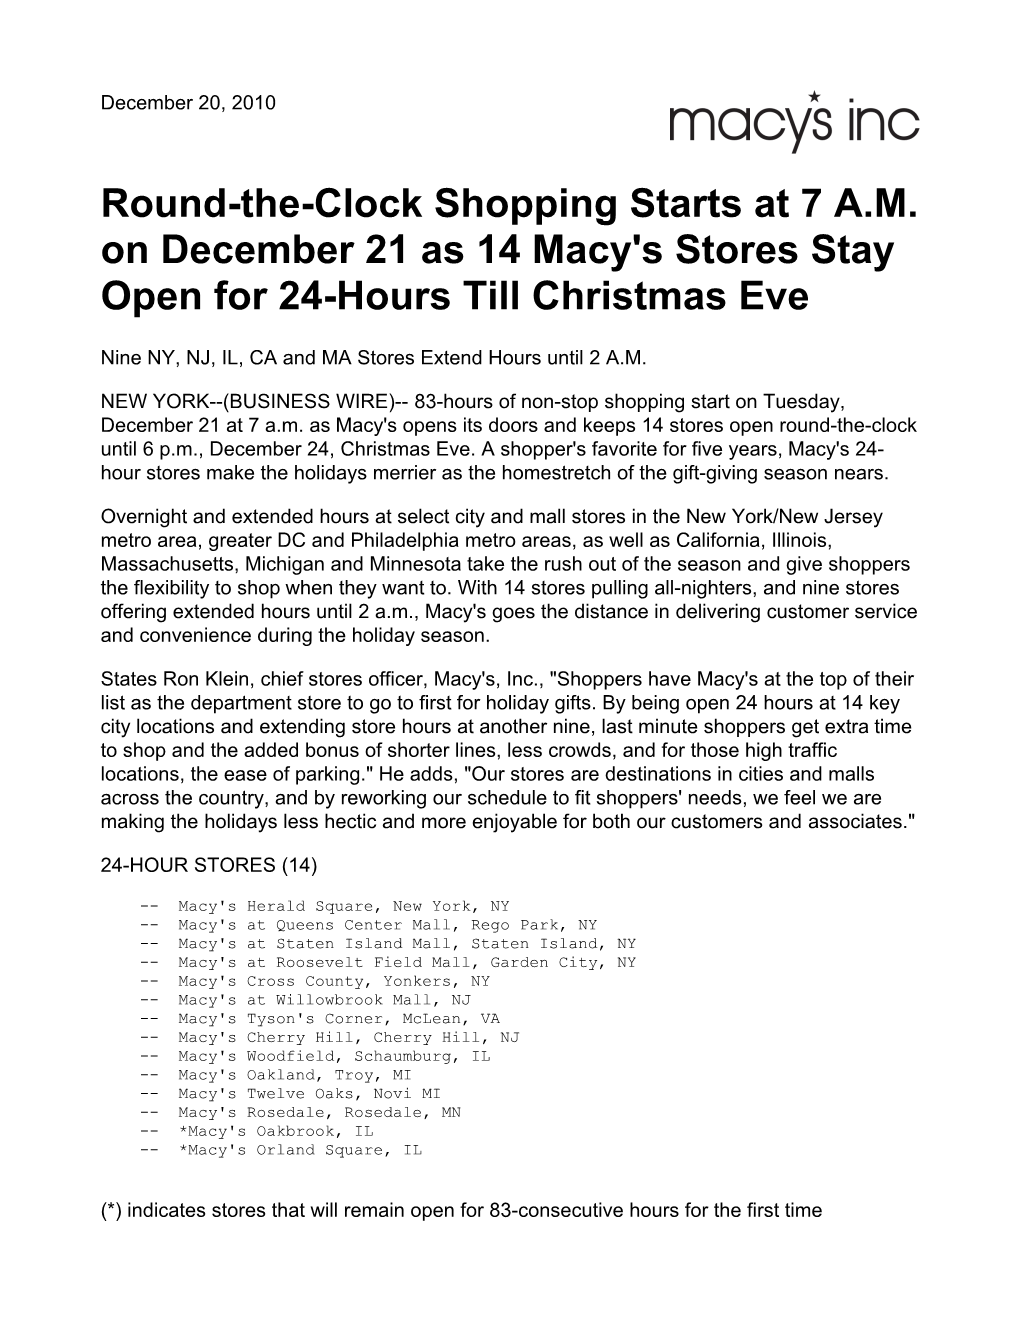 Round-The-Clock Shopping Starts at 7 AM On